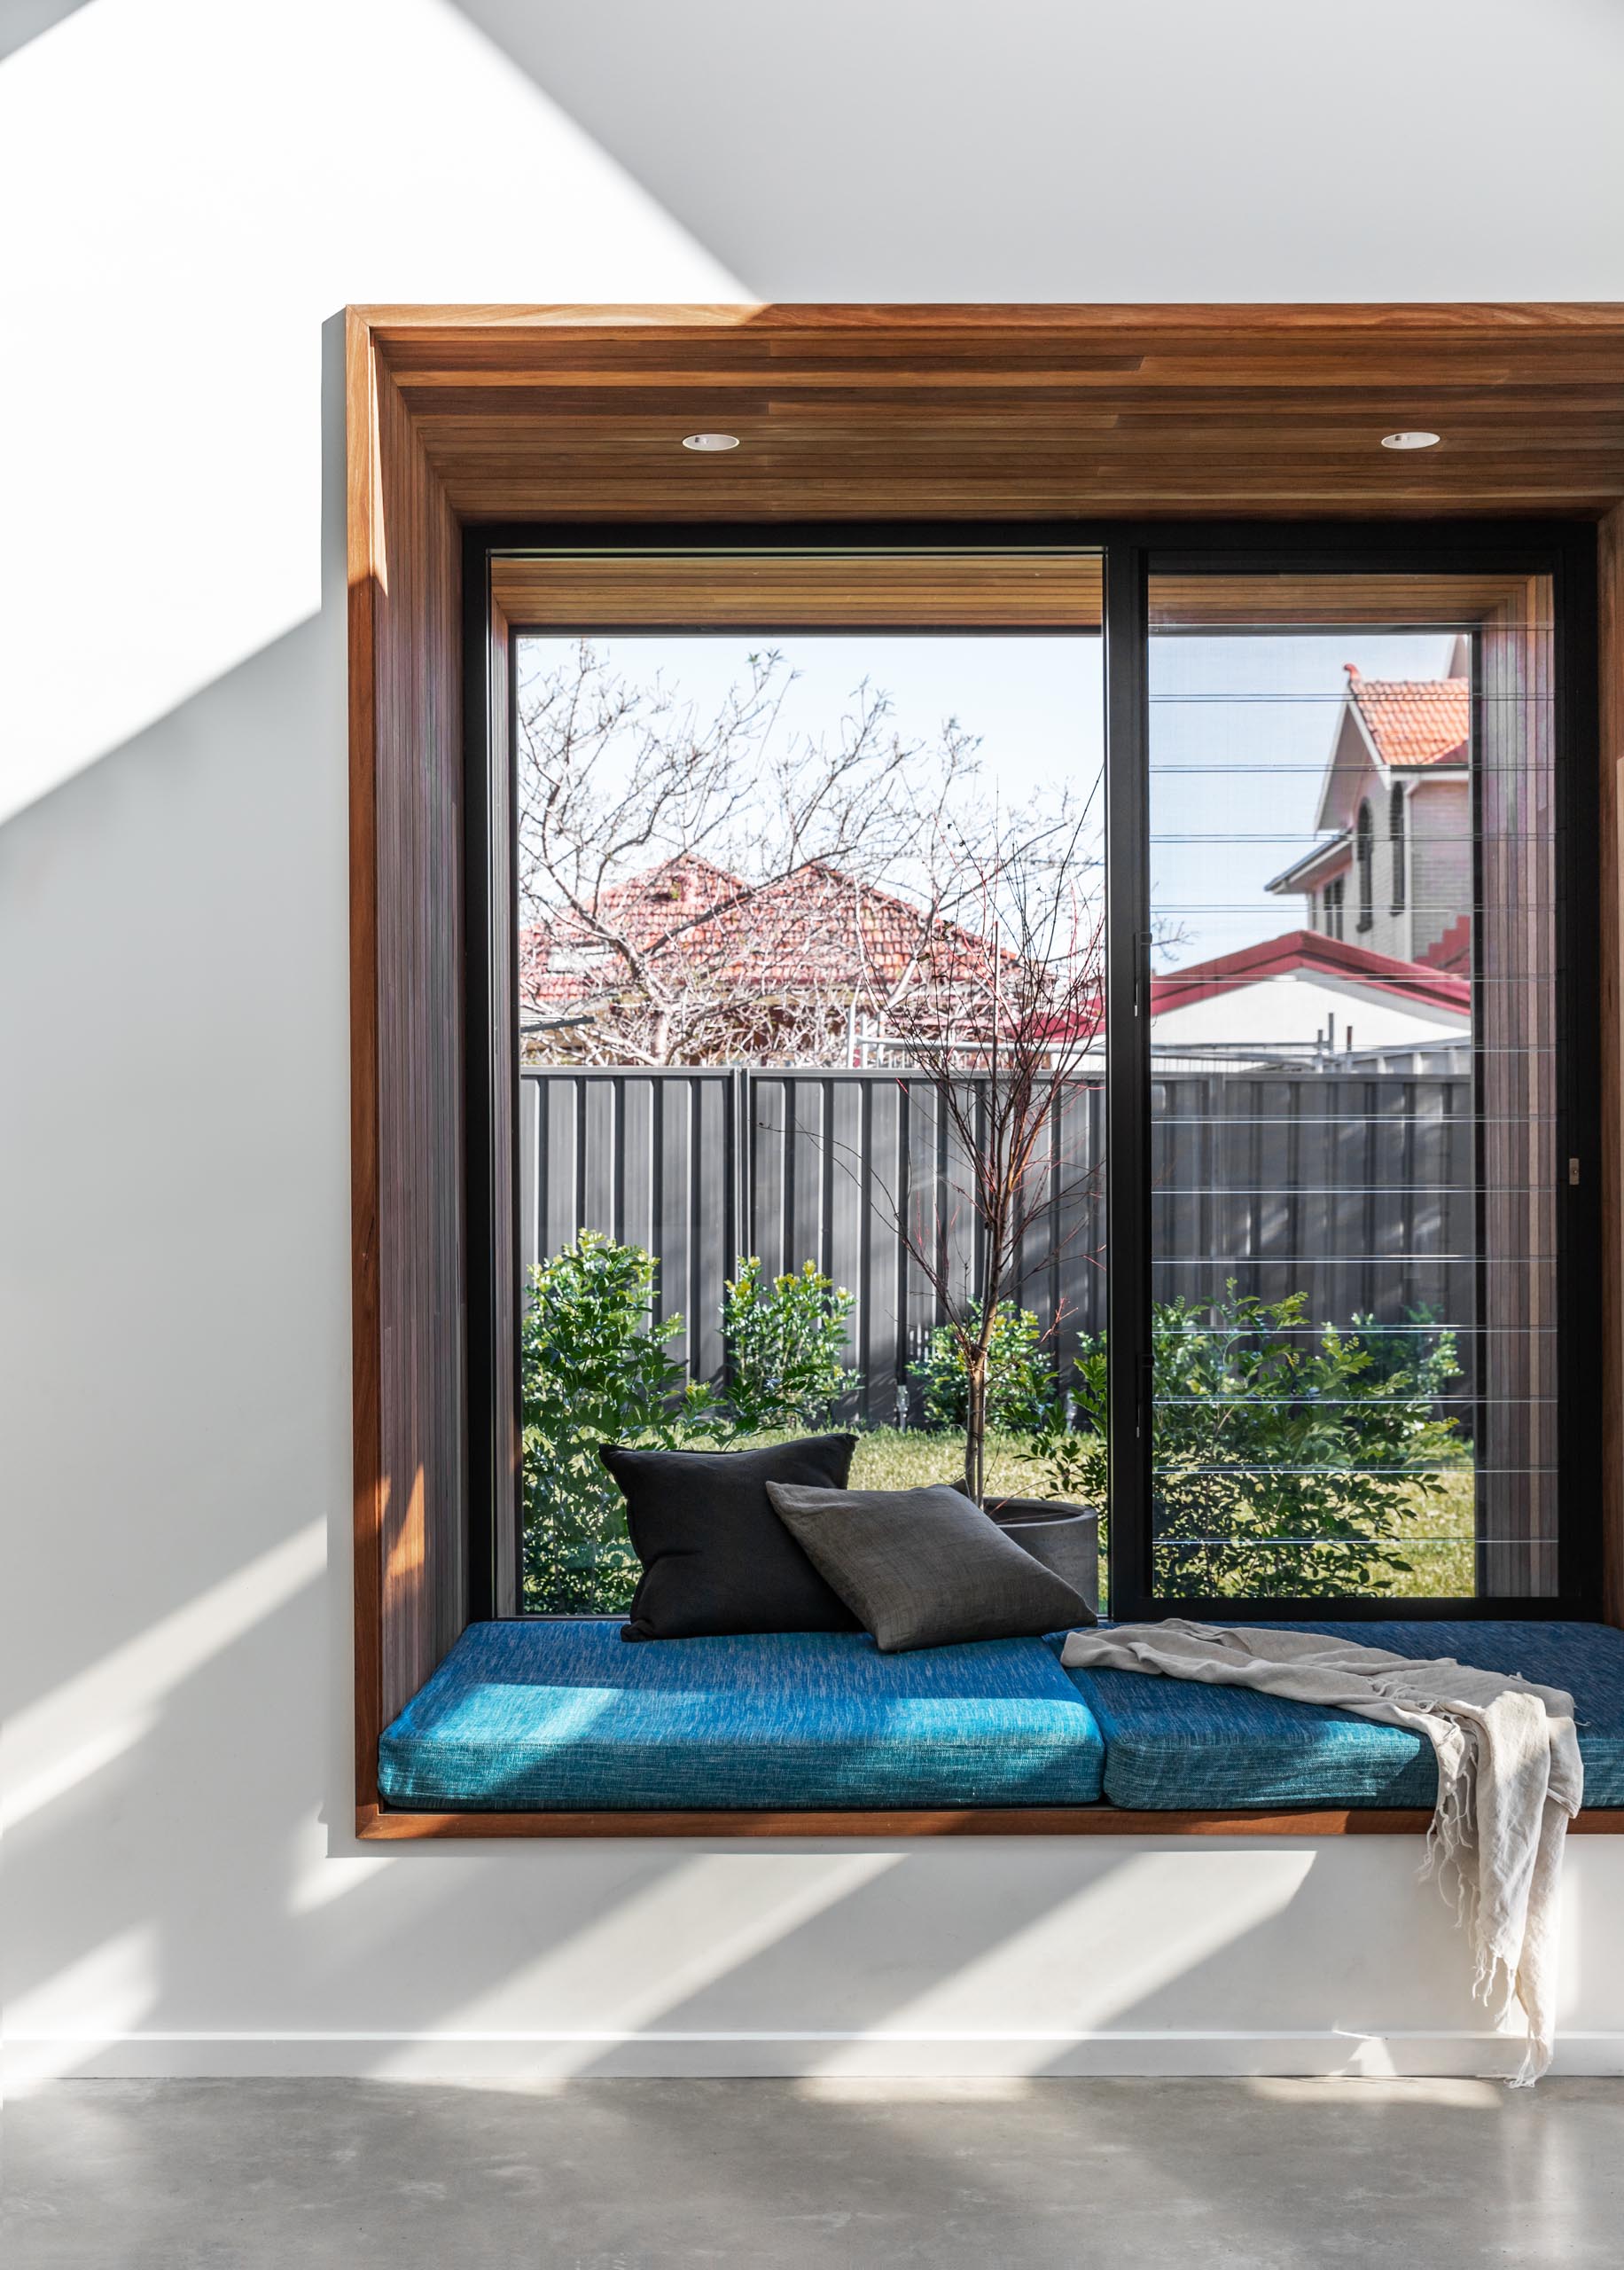 A large square timber-lined window box seat with blue upholstered cushion, that extends the view out to the garden.